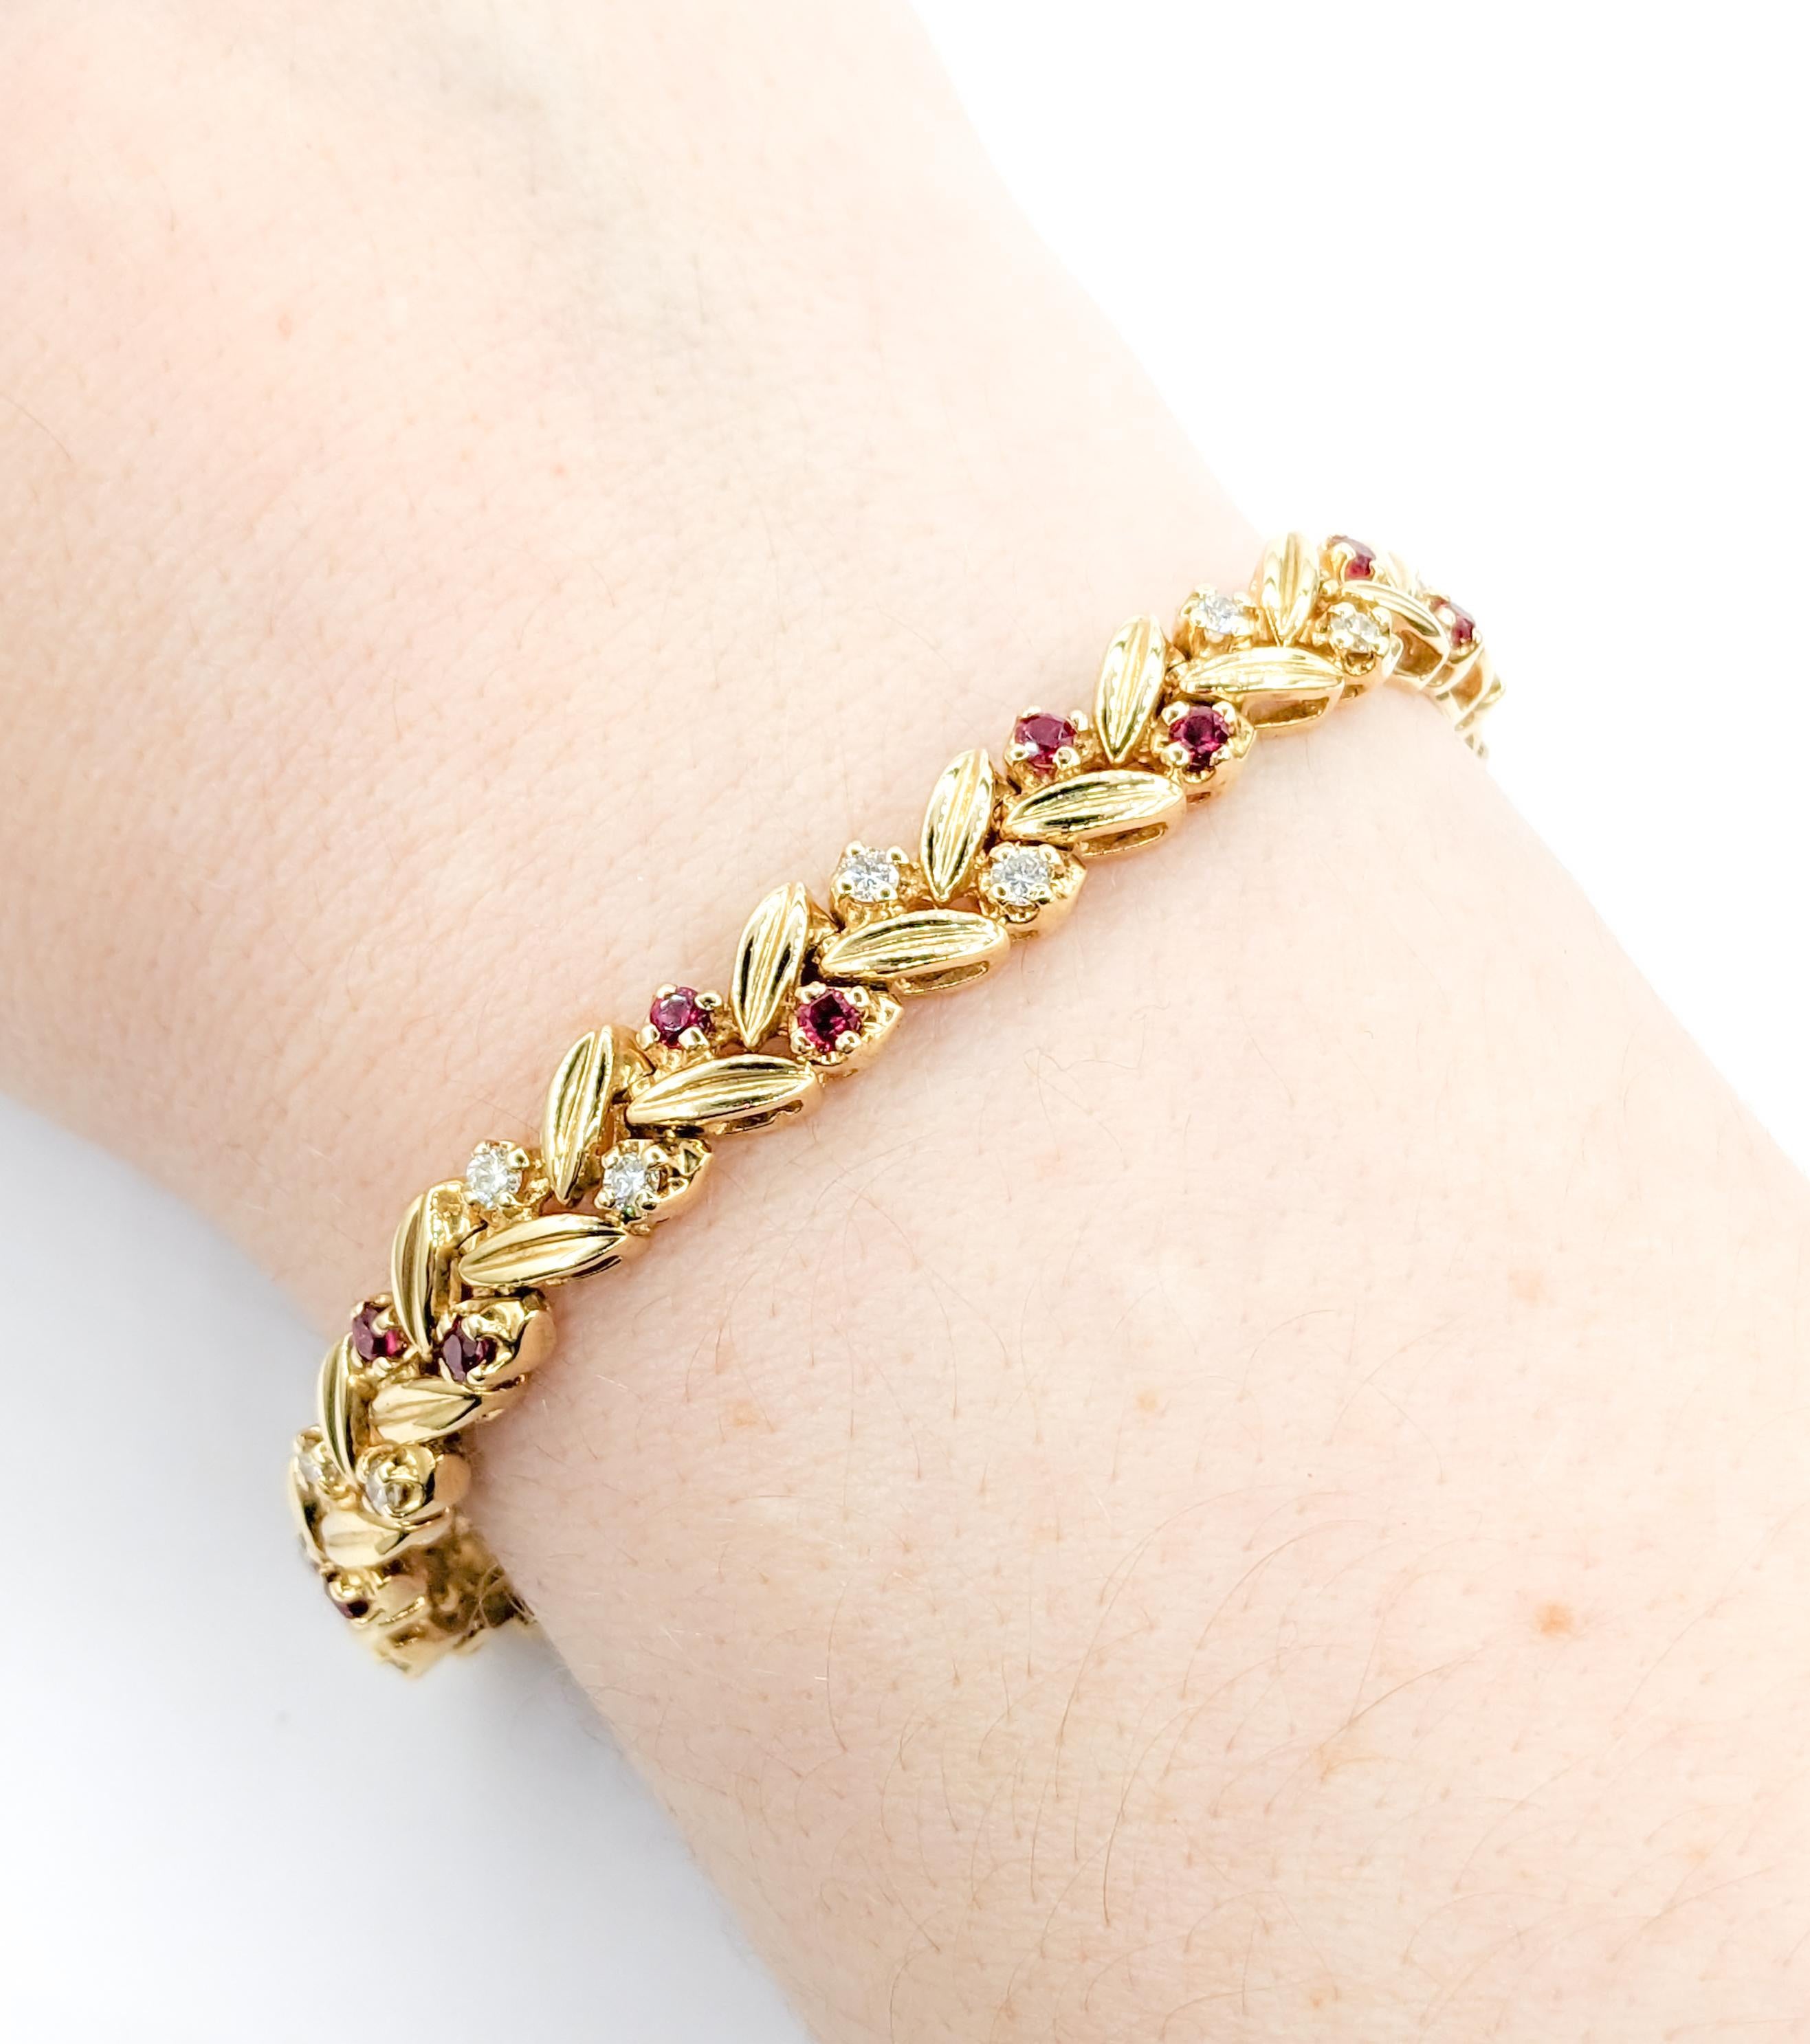 .80ctw Rubies & .65ctw Diamonds Bracelet In Yellow Gold

Discover the allure of this exquisite bracelet, masterfully created in 14kt yellow gold. This piece showcases .65ctw of round diamonds with SI2 clarity and J-K color, alongside .80ctw of